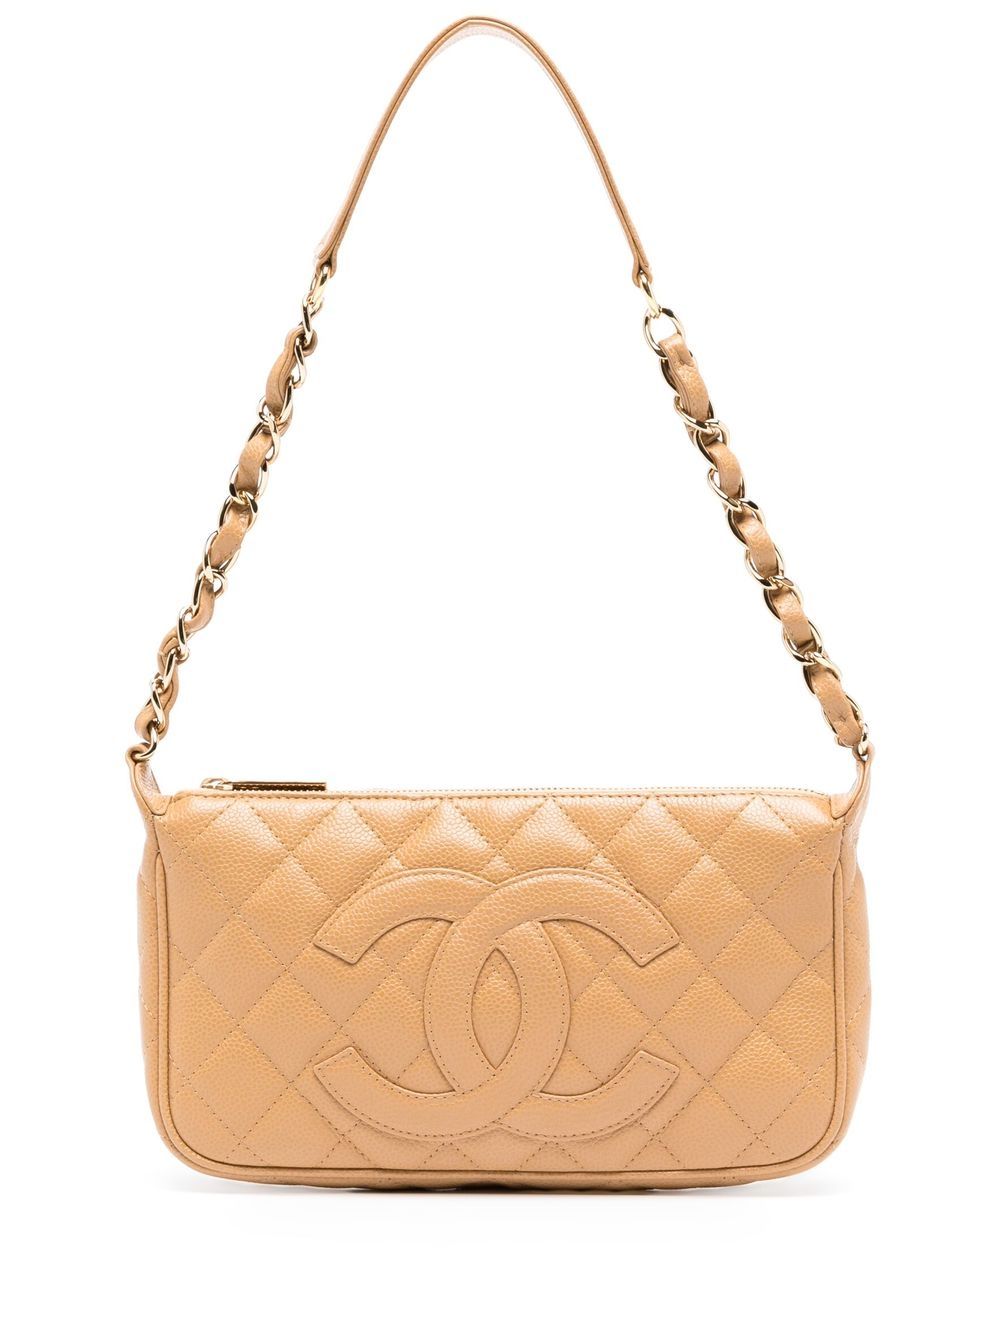 Chanel Pre-Owned 2003 CC diamond-quilted shoulder bag